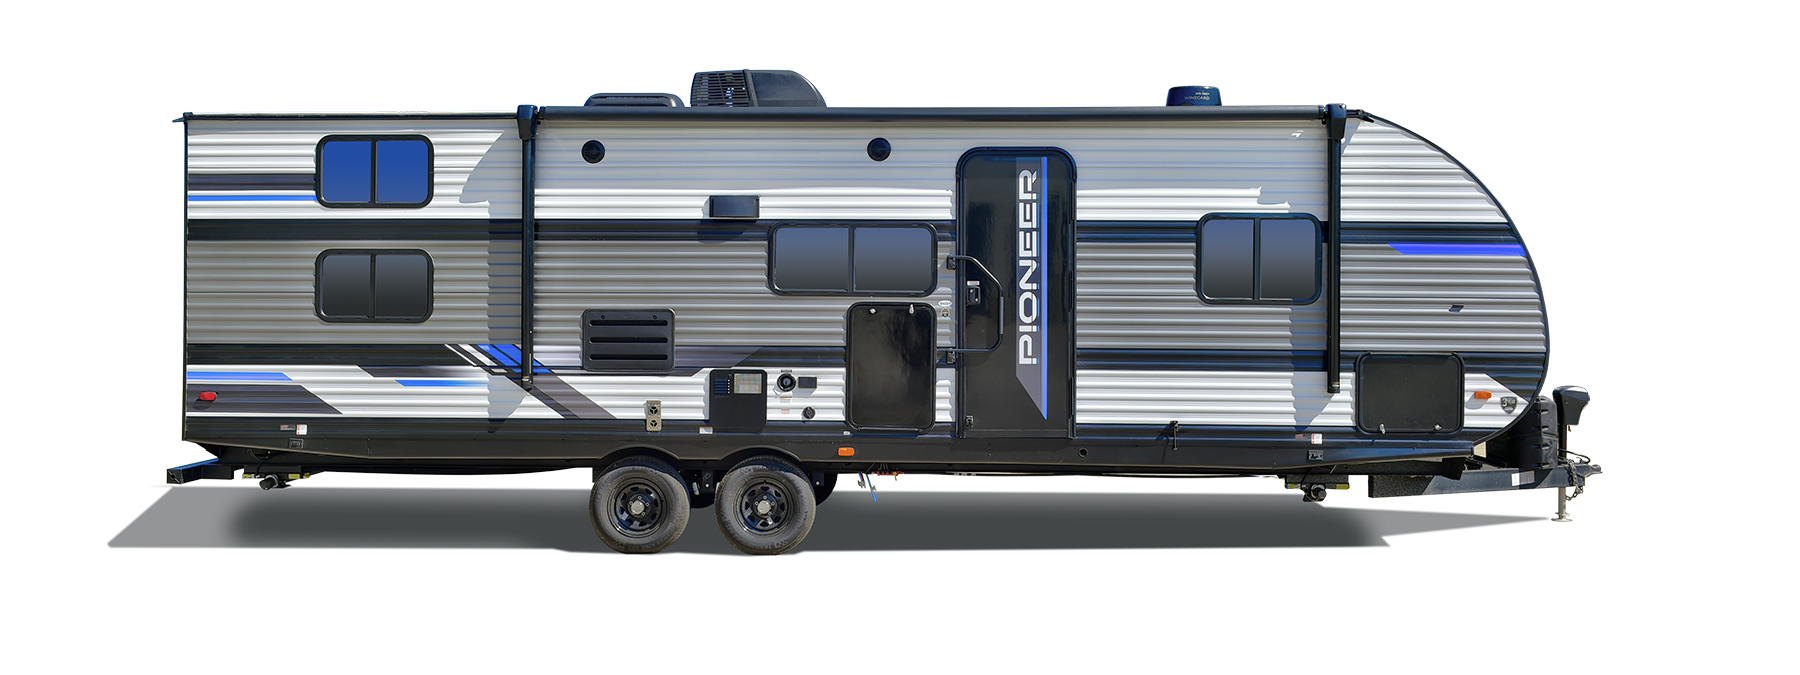 who makes the pioneer travel trailer